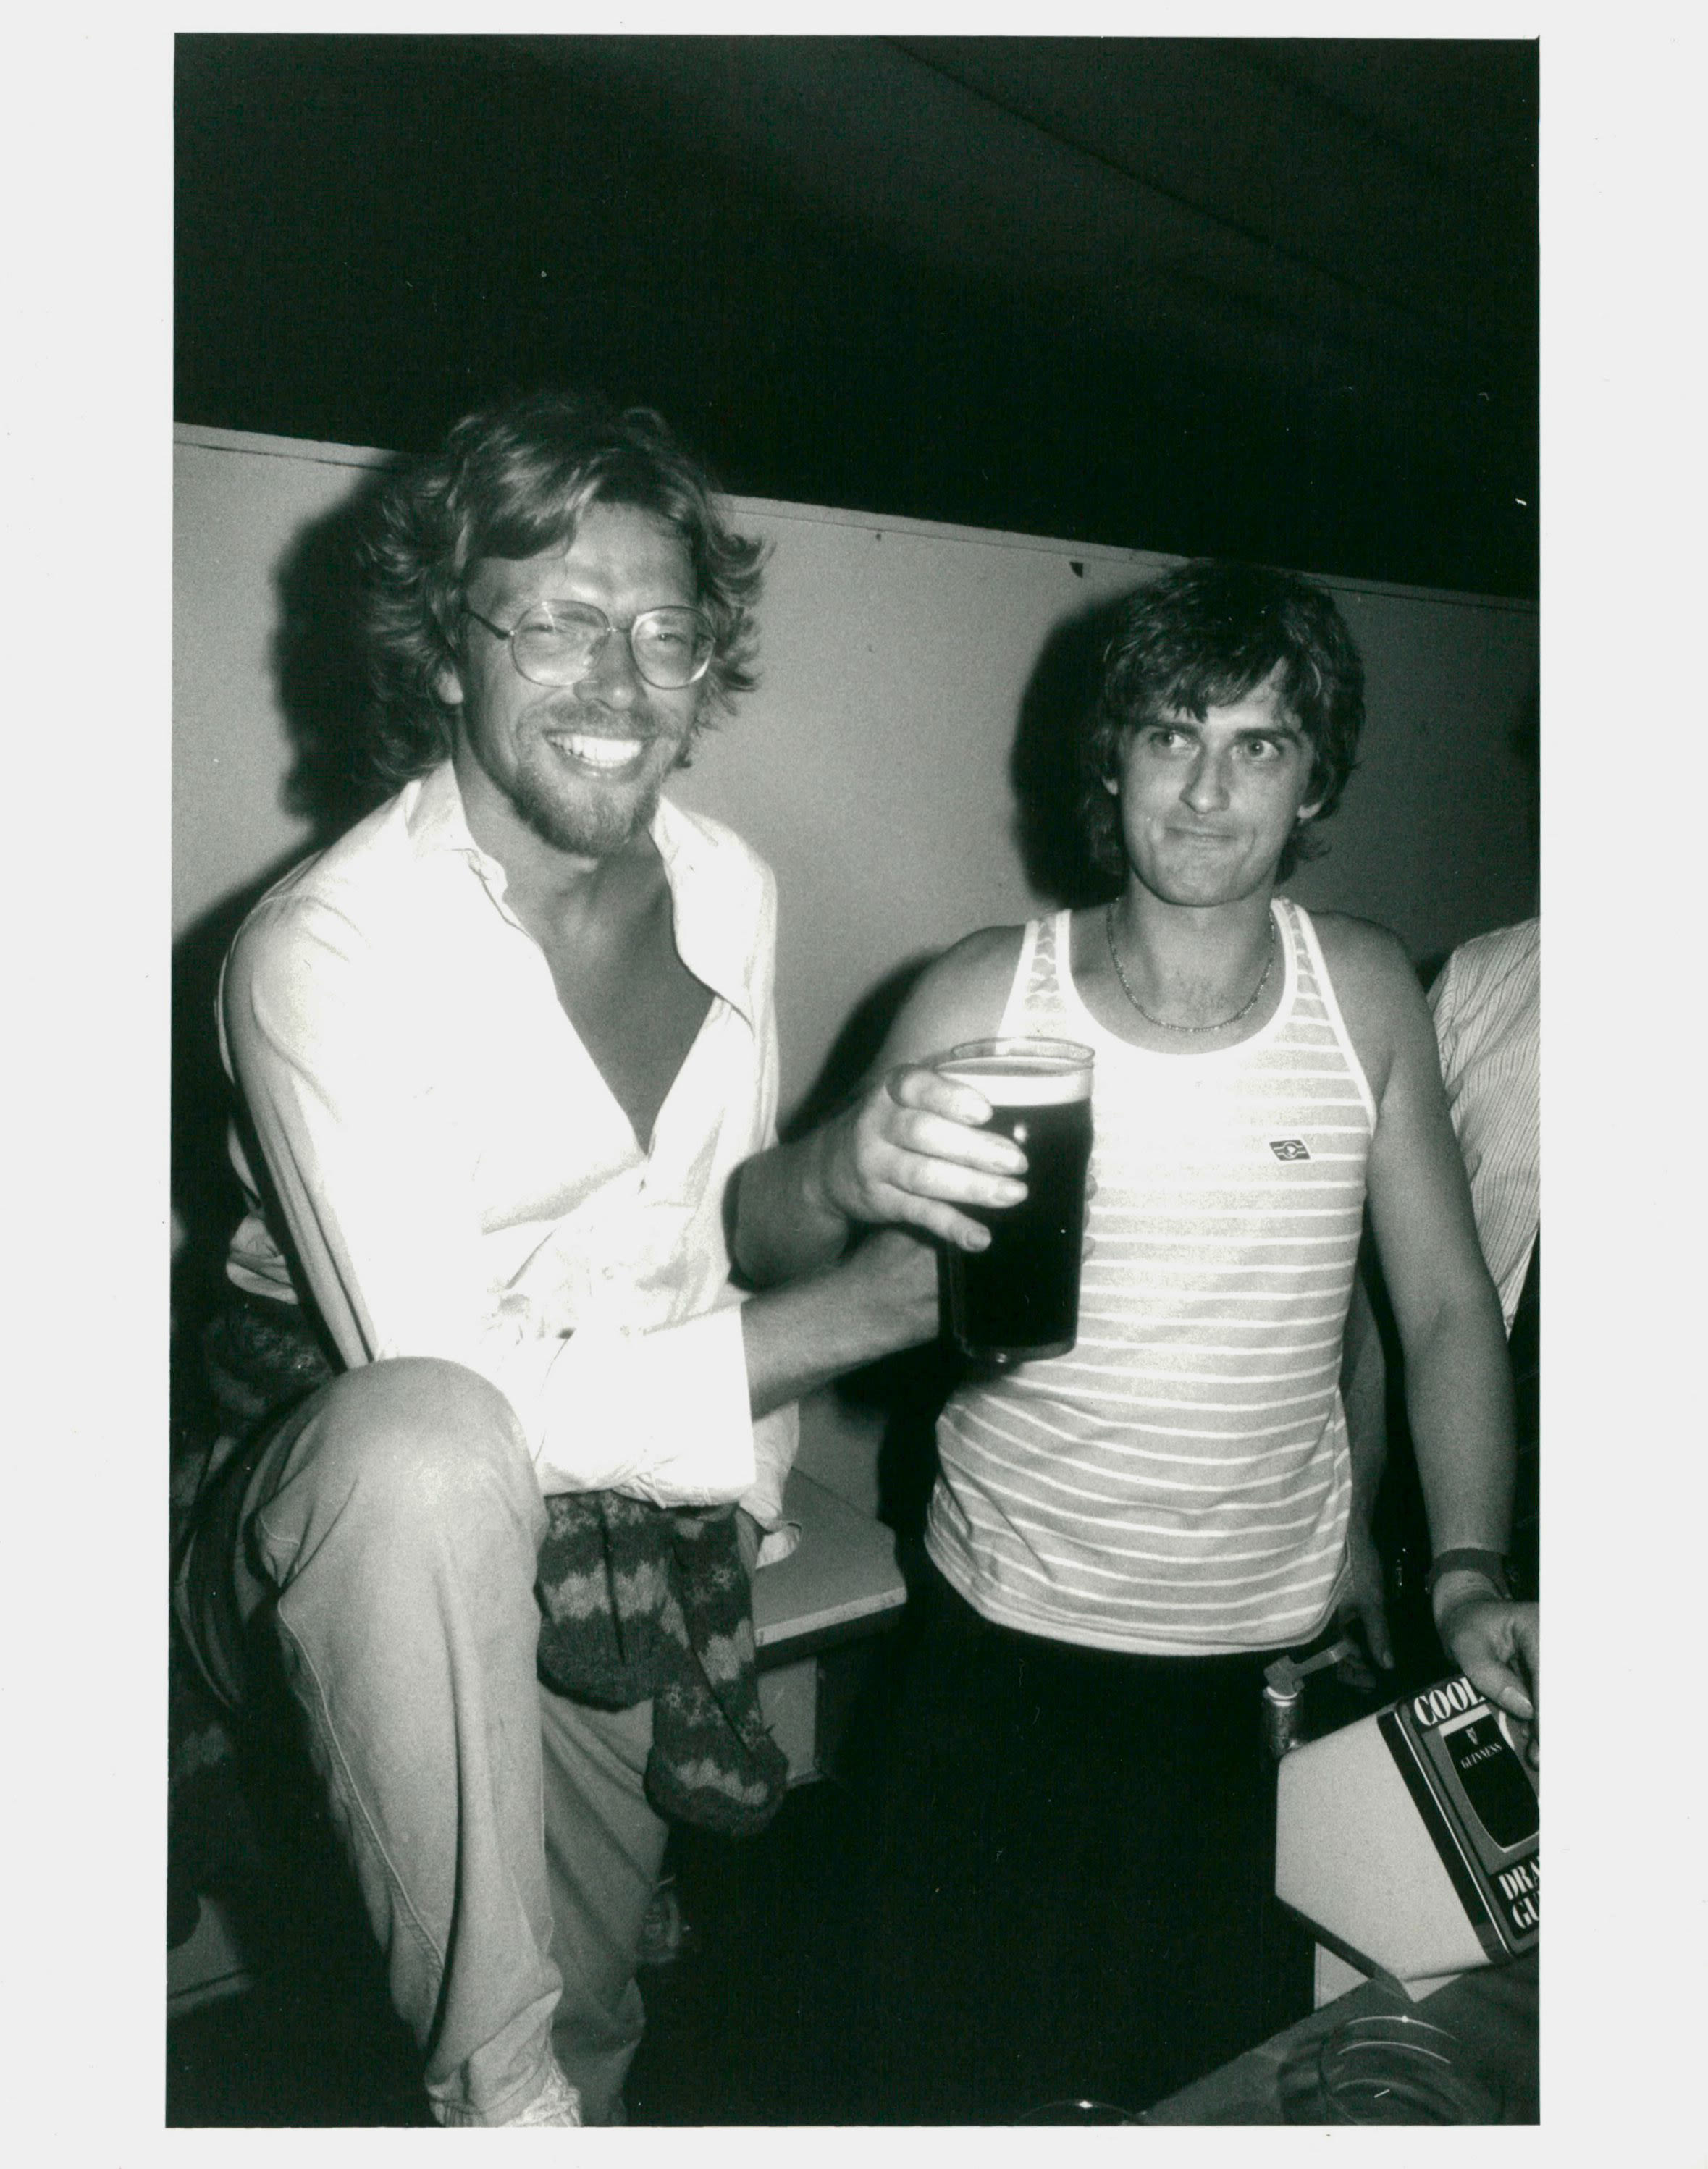 Richard Branson and Mike Oldfield